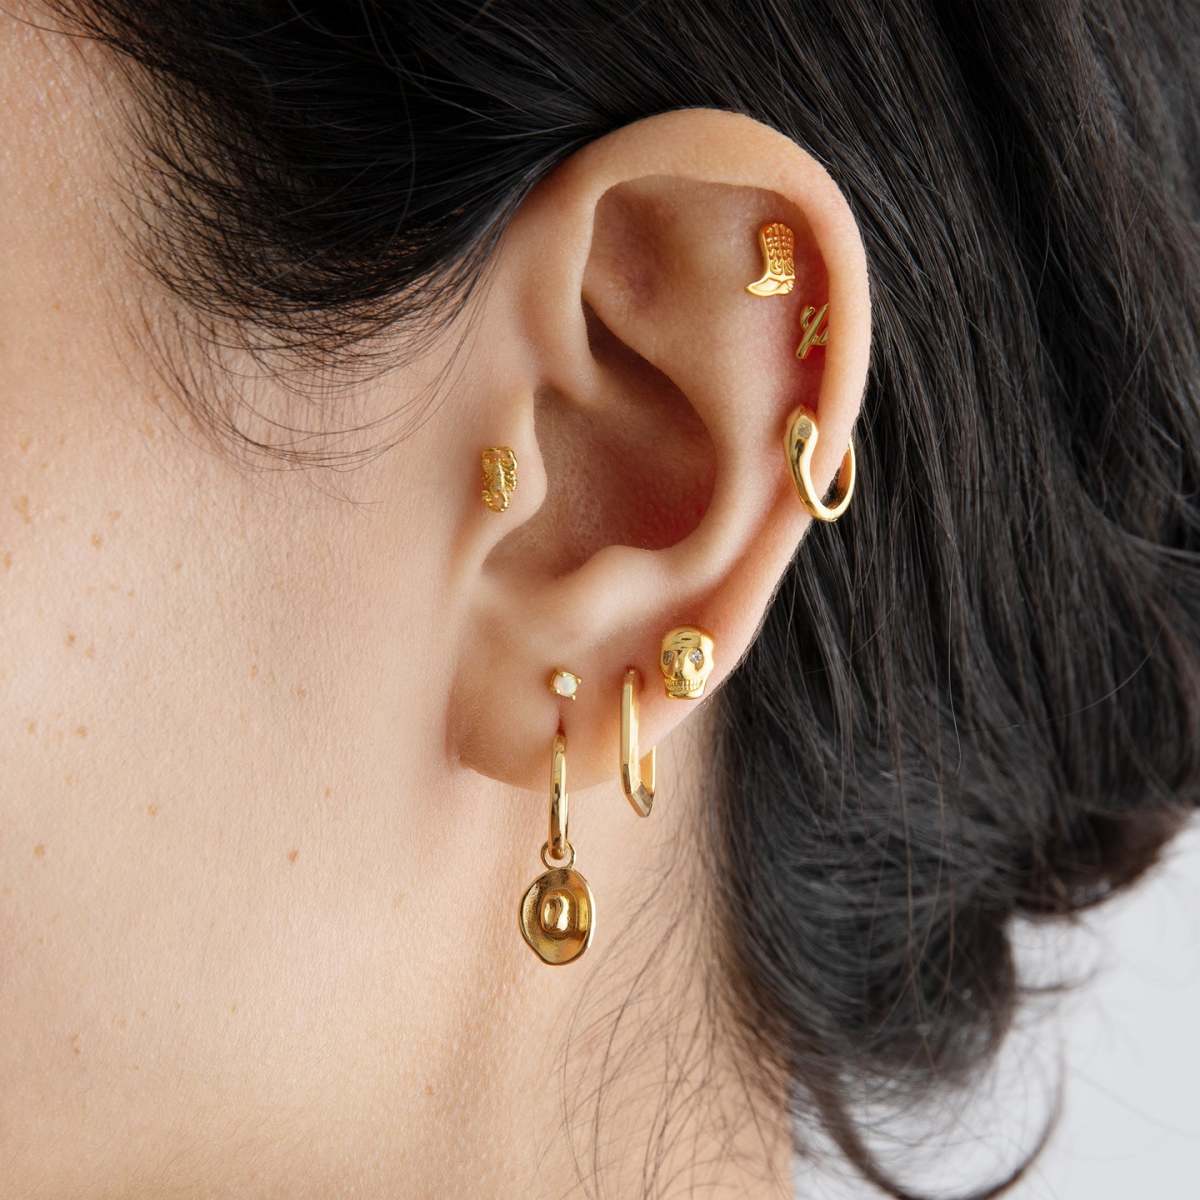 An Updated, Less-Boring Take on Classic Hoop Earrings - Fashionista